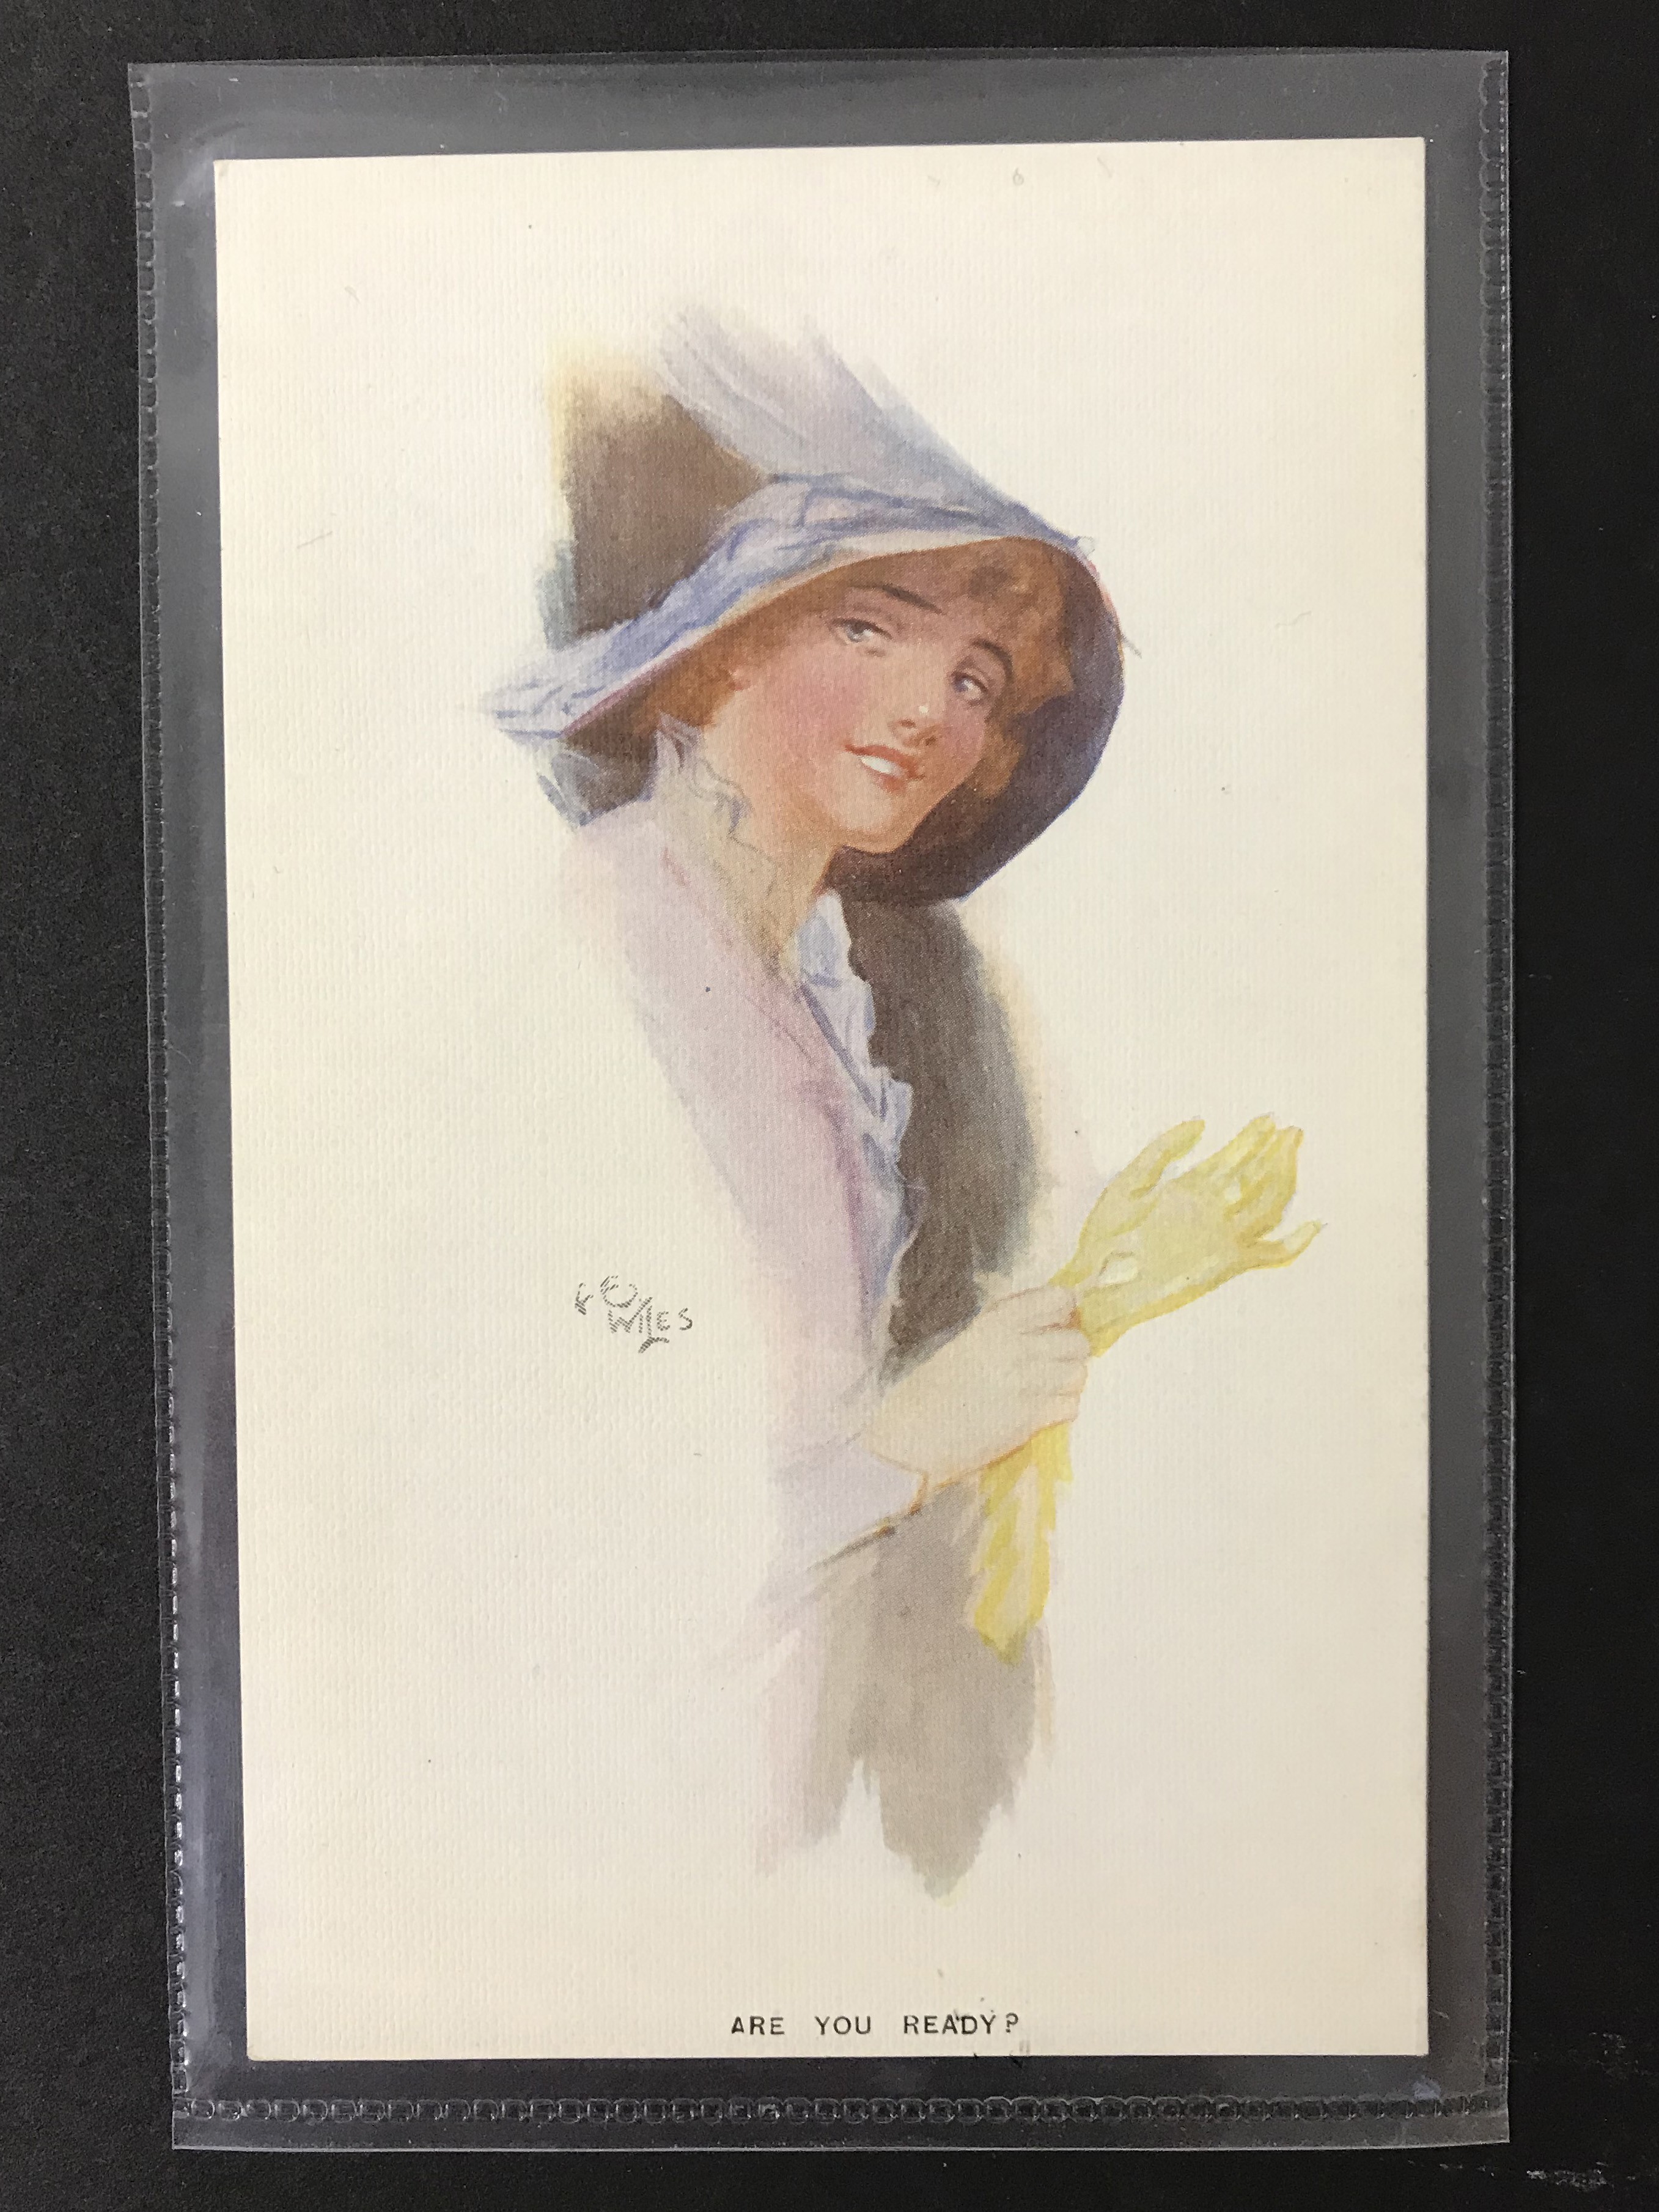 COMPLETE SET OF SIX GLAMOUR POSTCARDS OF WOMEN WITH HAT BY F E WILES - Image 3 of 8